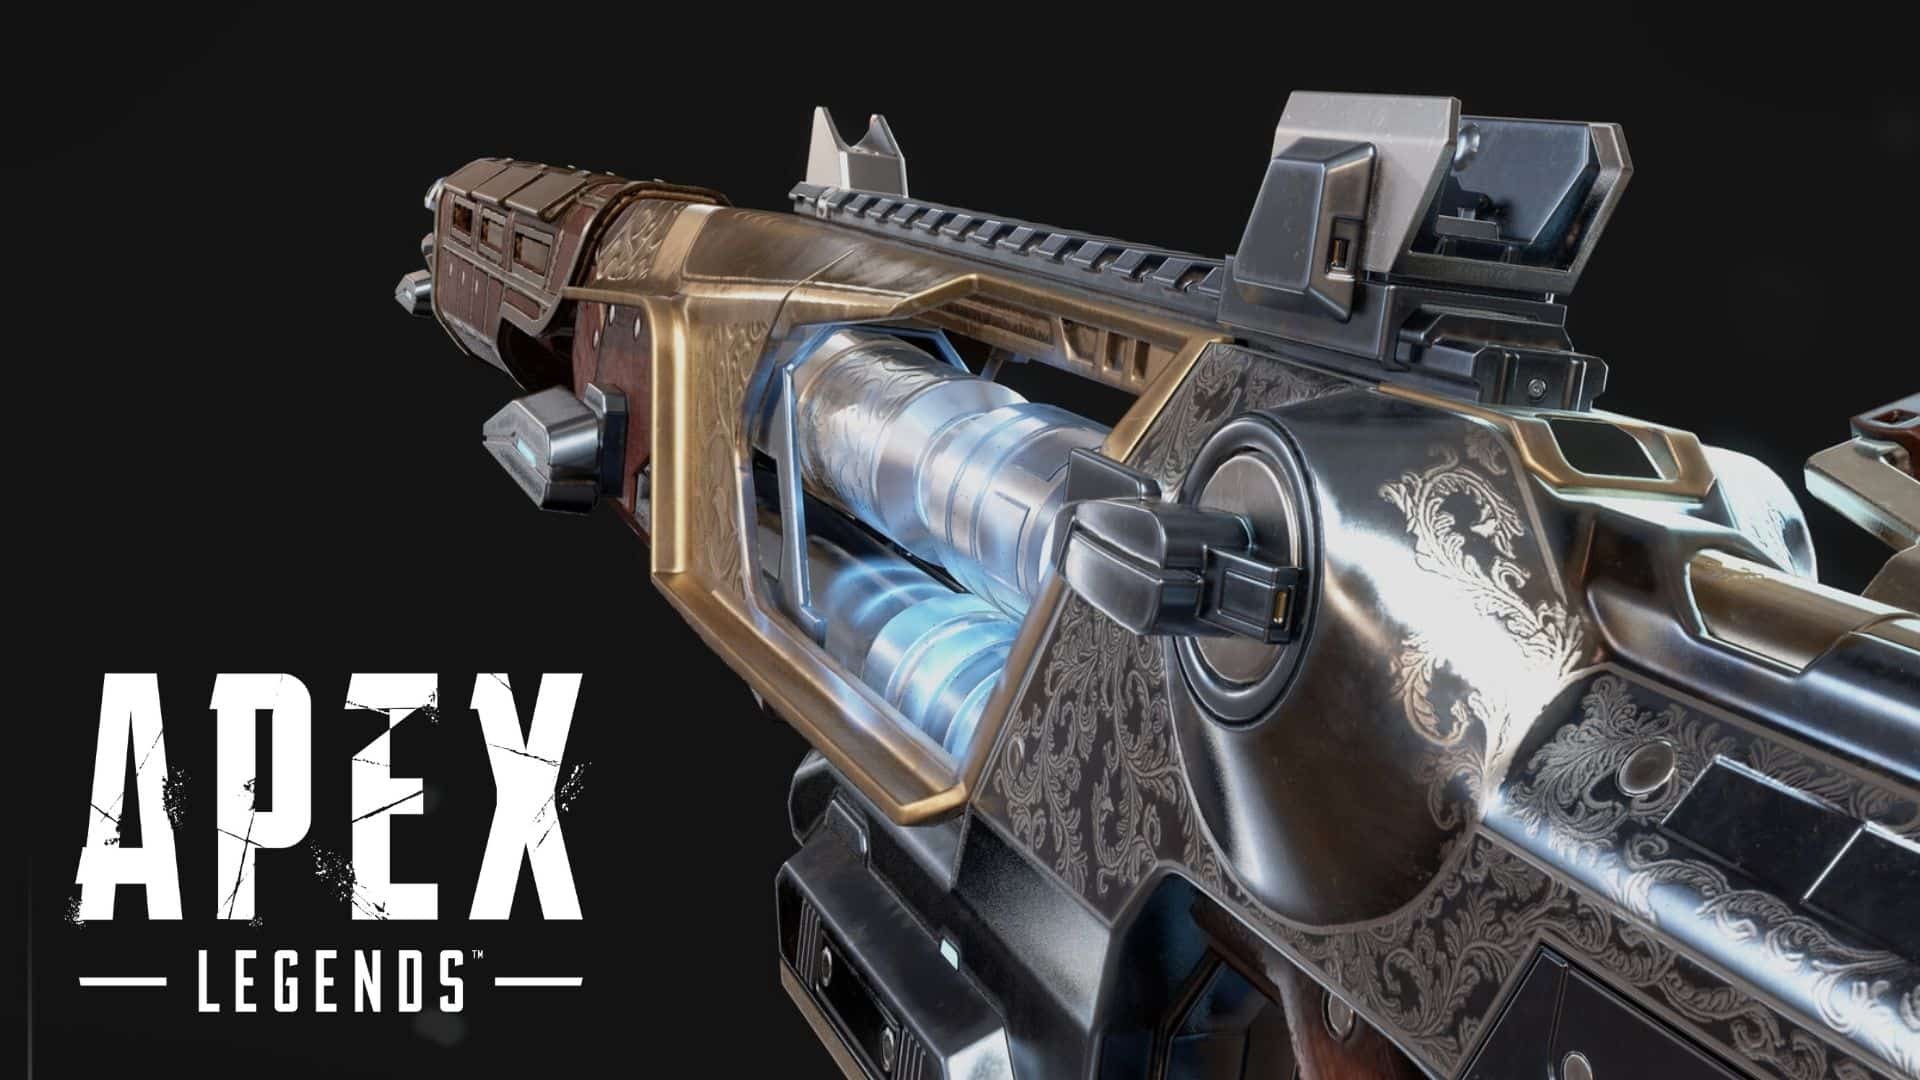 Apex Legends “toe-scope” might be greatest trickshot of all time